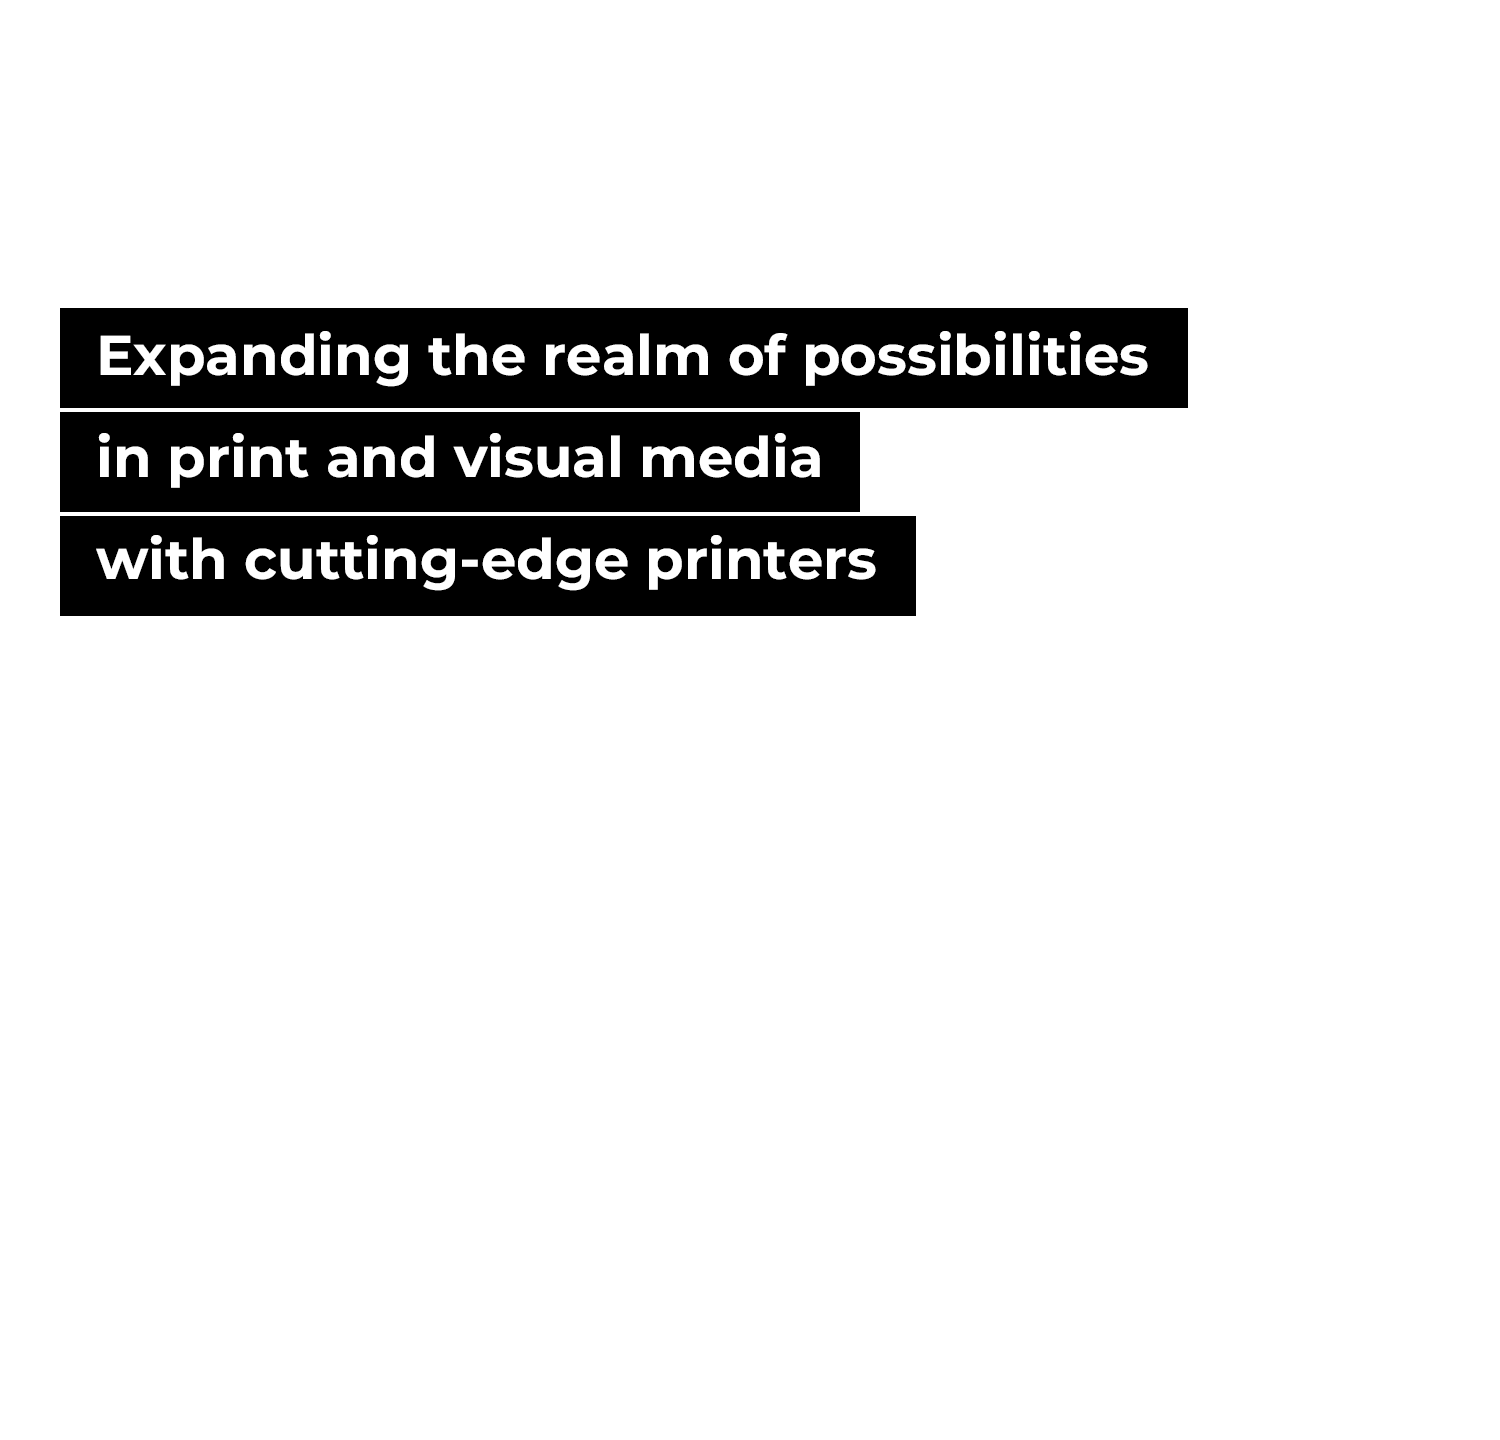 Expanding the realm of possibilities in print and visual media with cutting-edge printers